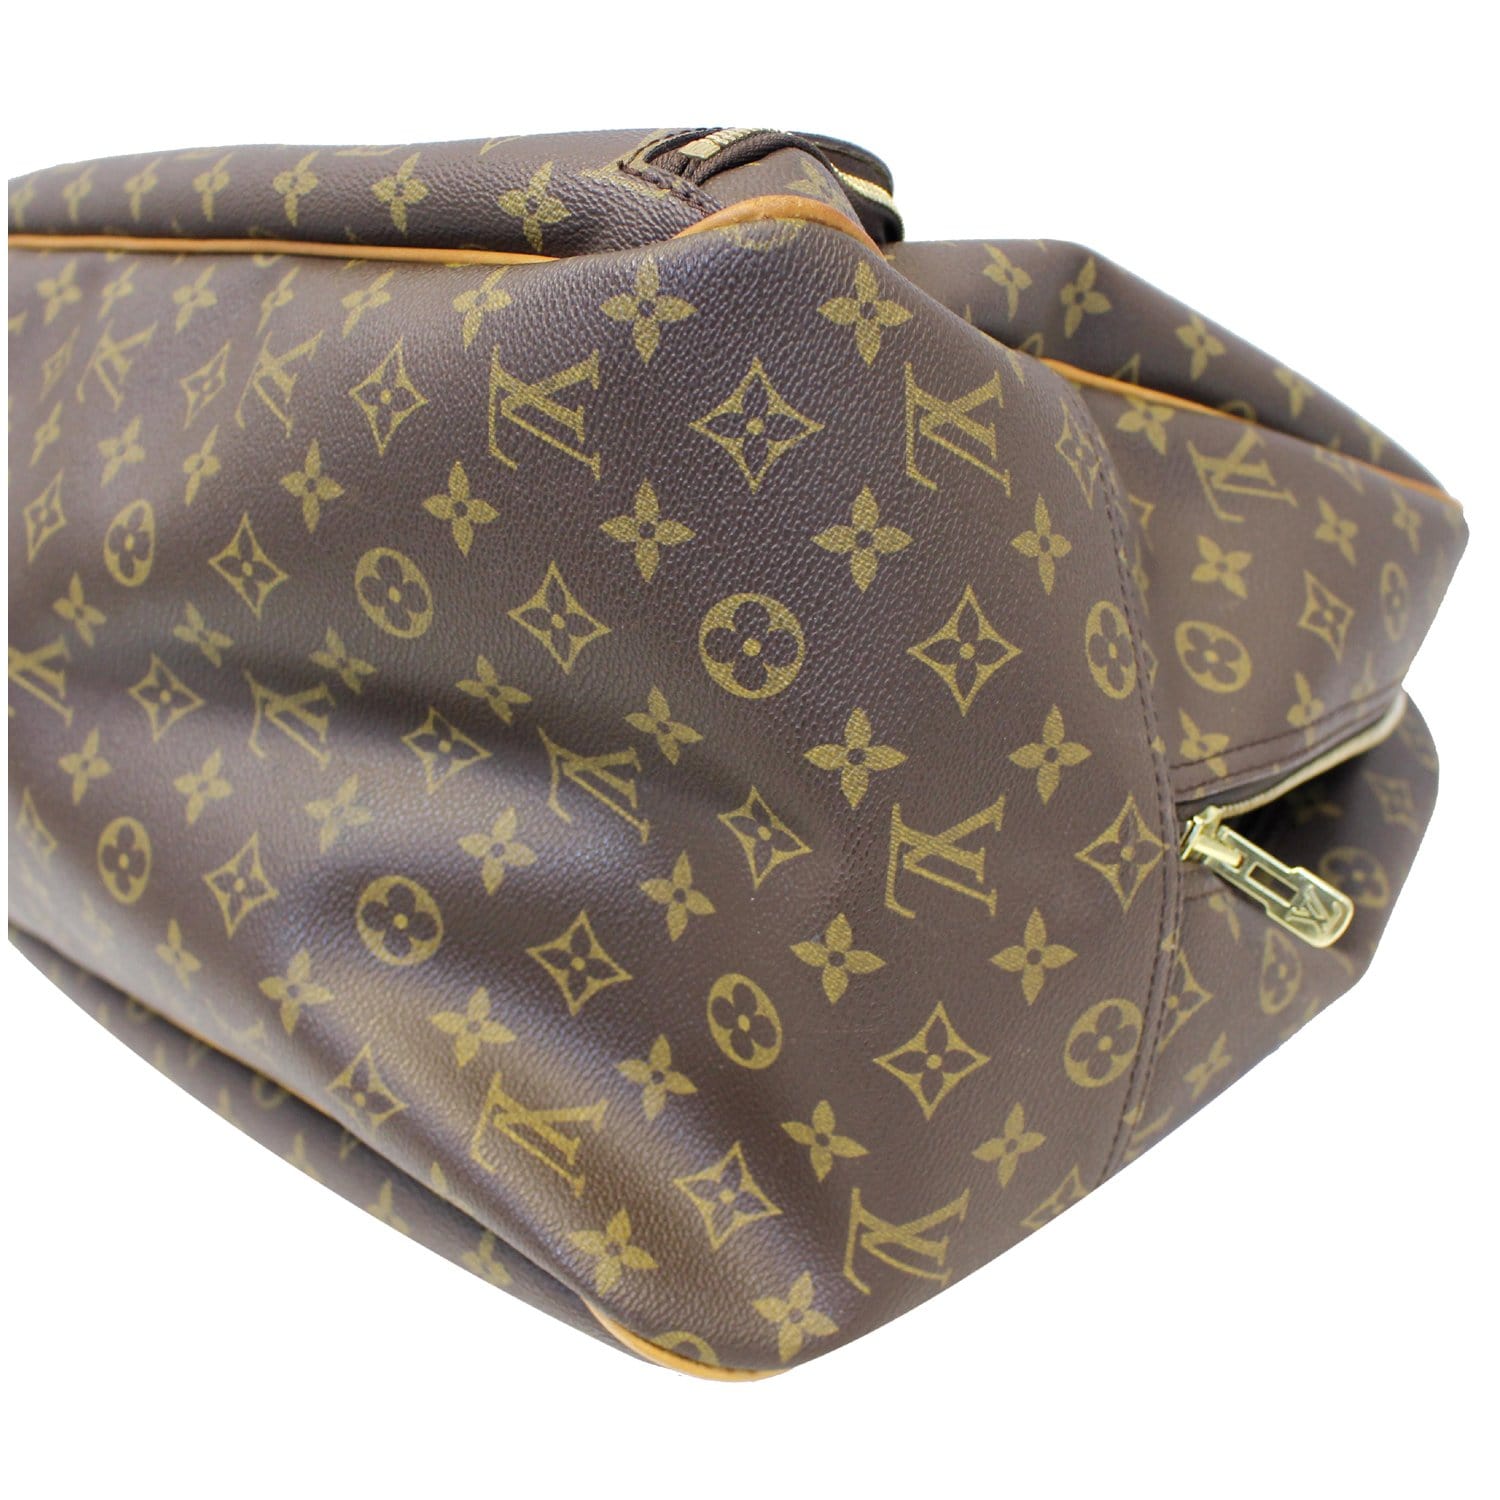 Is Louis Vuitton discontinuing canvas bags..? – Buy the goddamn bag